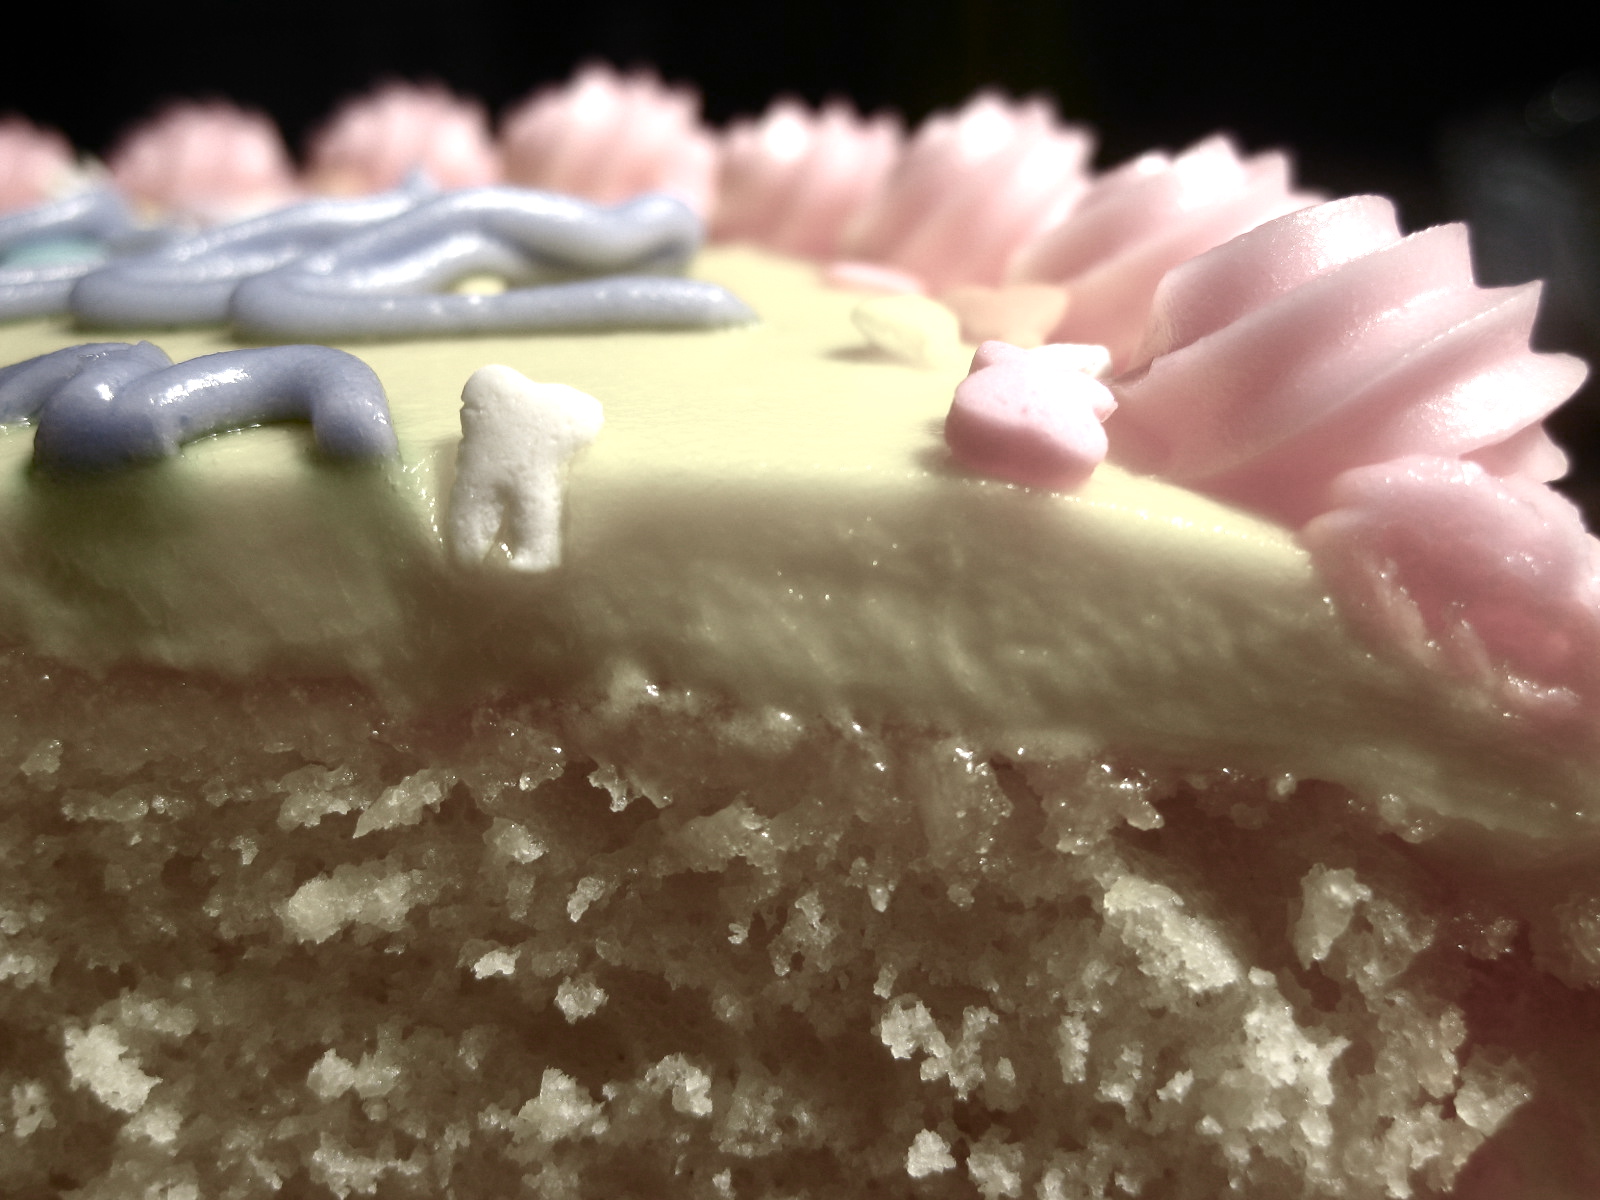 an extreme close up image of a slice of cake with icing